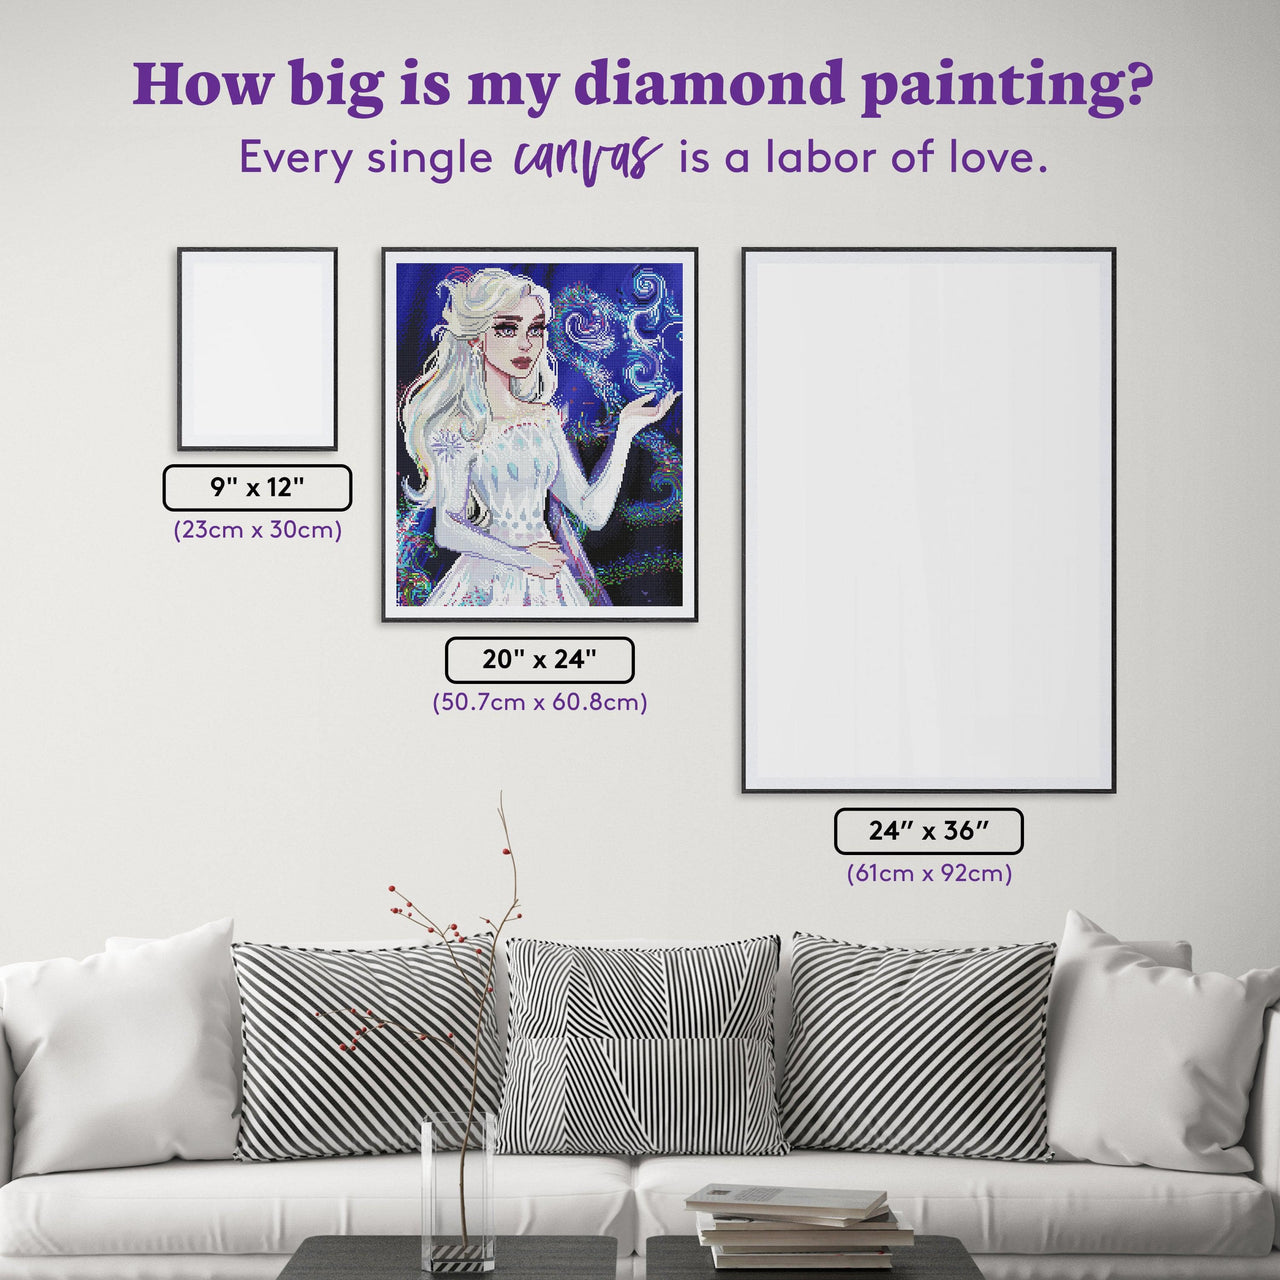 Diamond Painting Snow Queen 20" x 24" (50.7cm x 60.8cm) / Round with 43 Colors including 5 ABs / 39,277